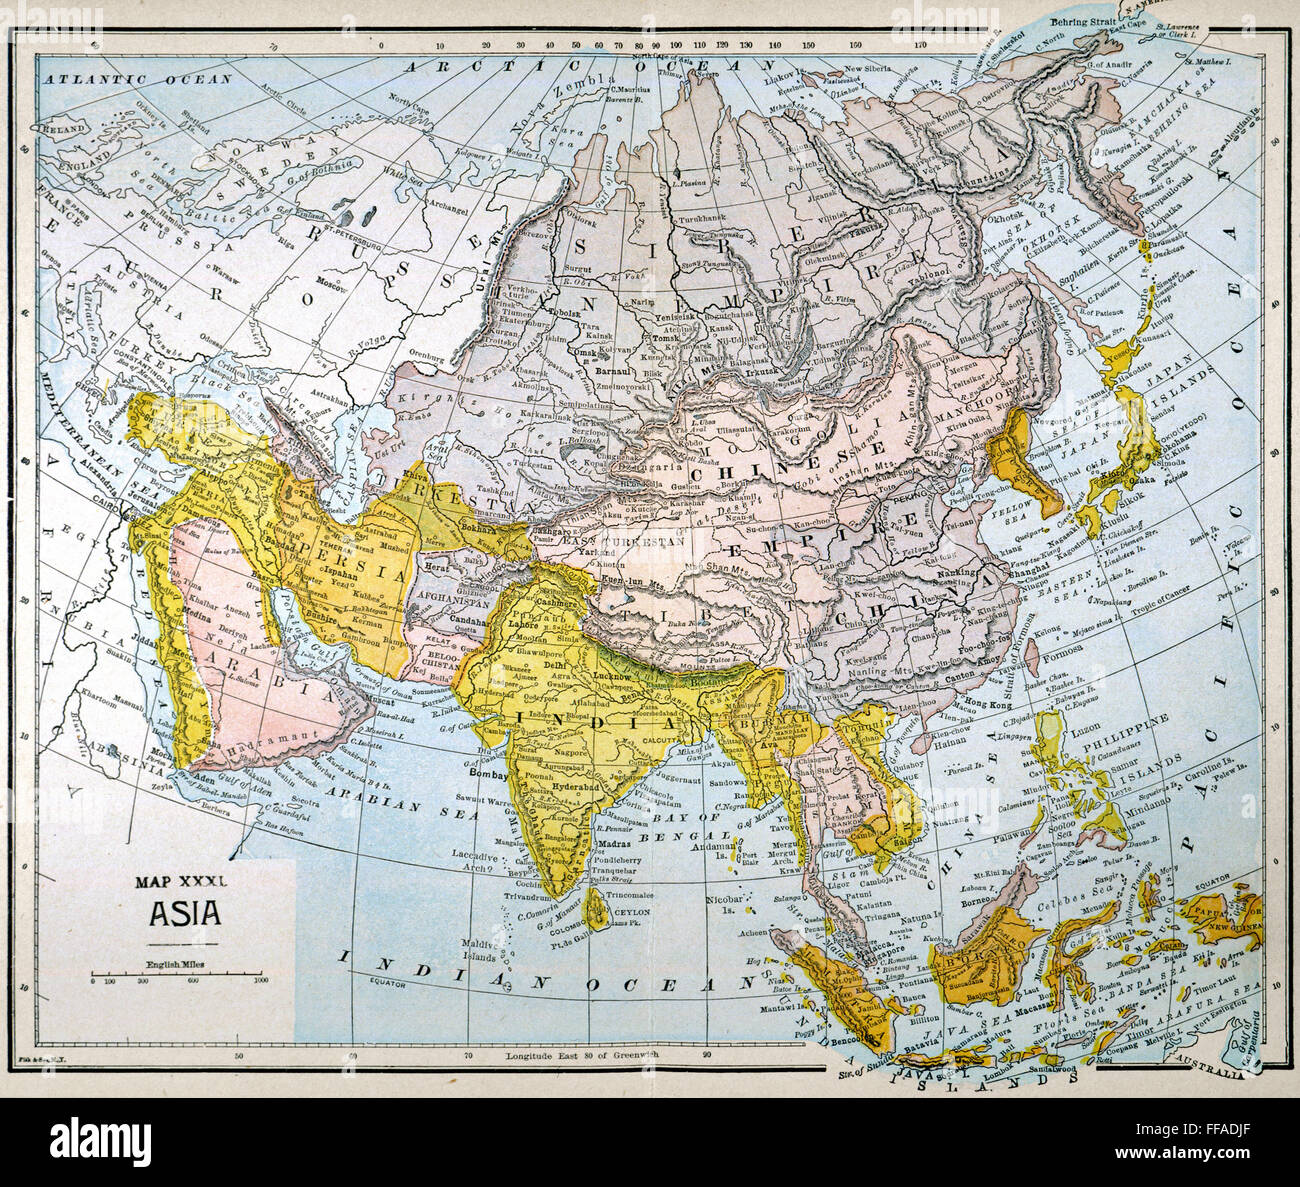 ASIA MAP LATE 19TH CENTURY. Stock Photo